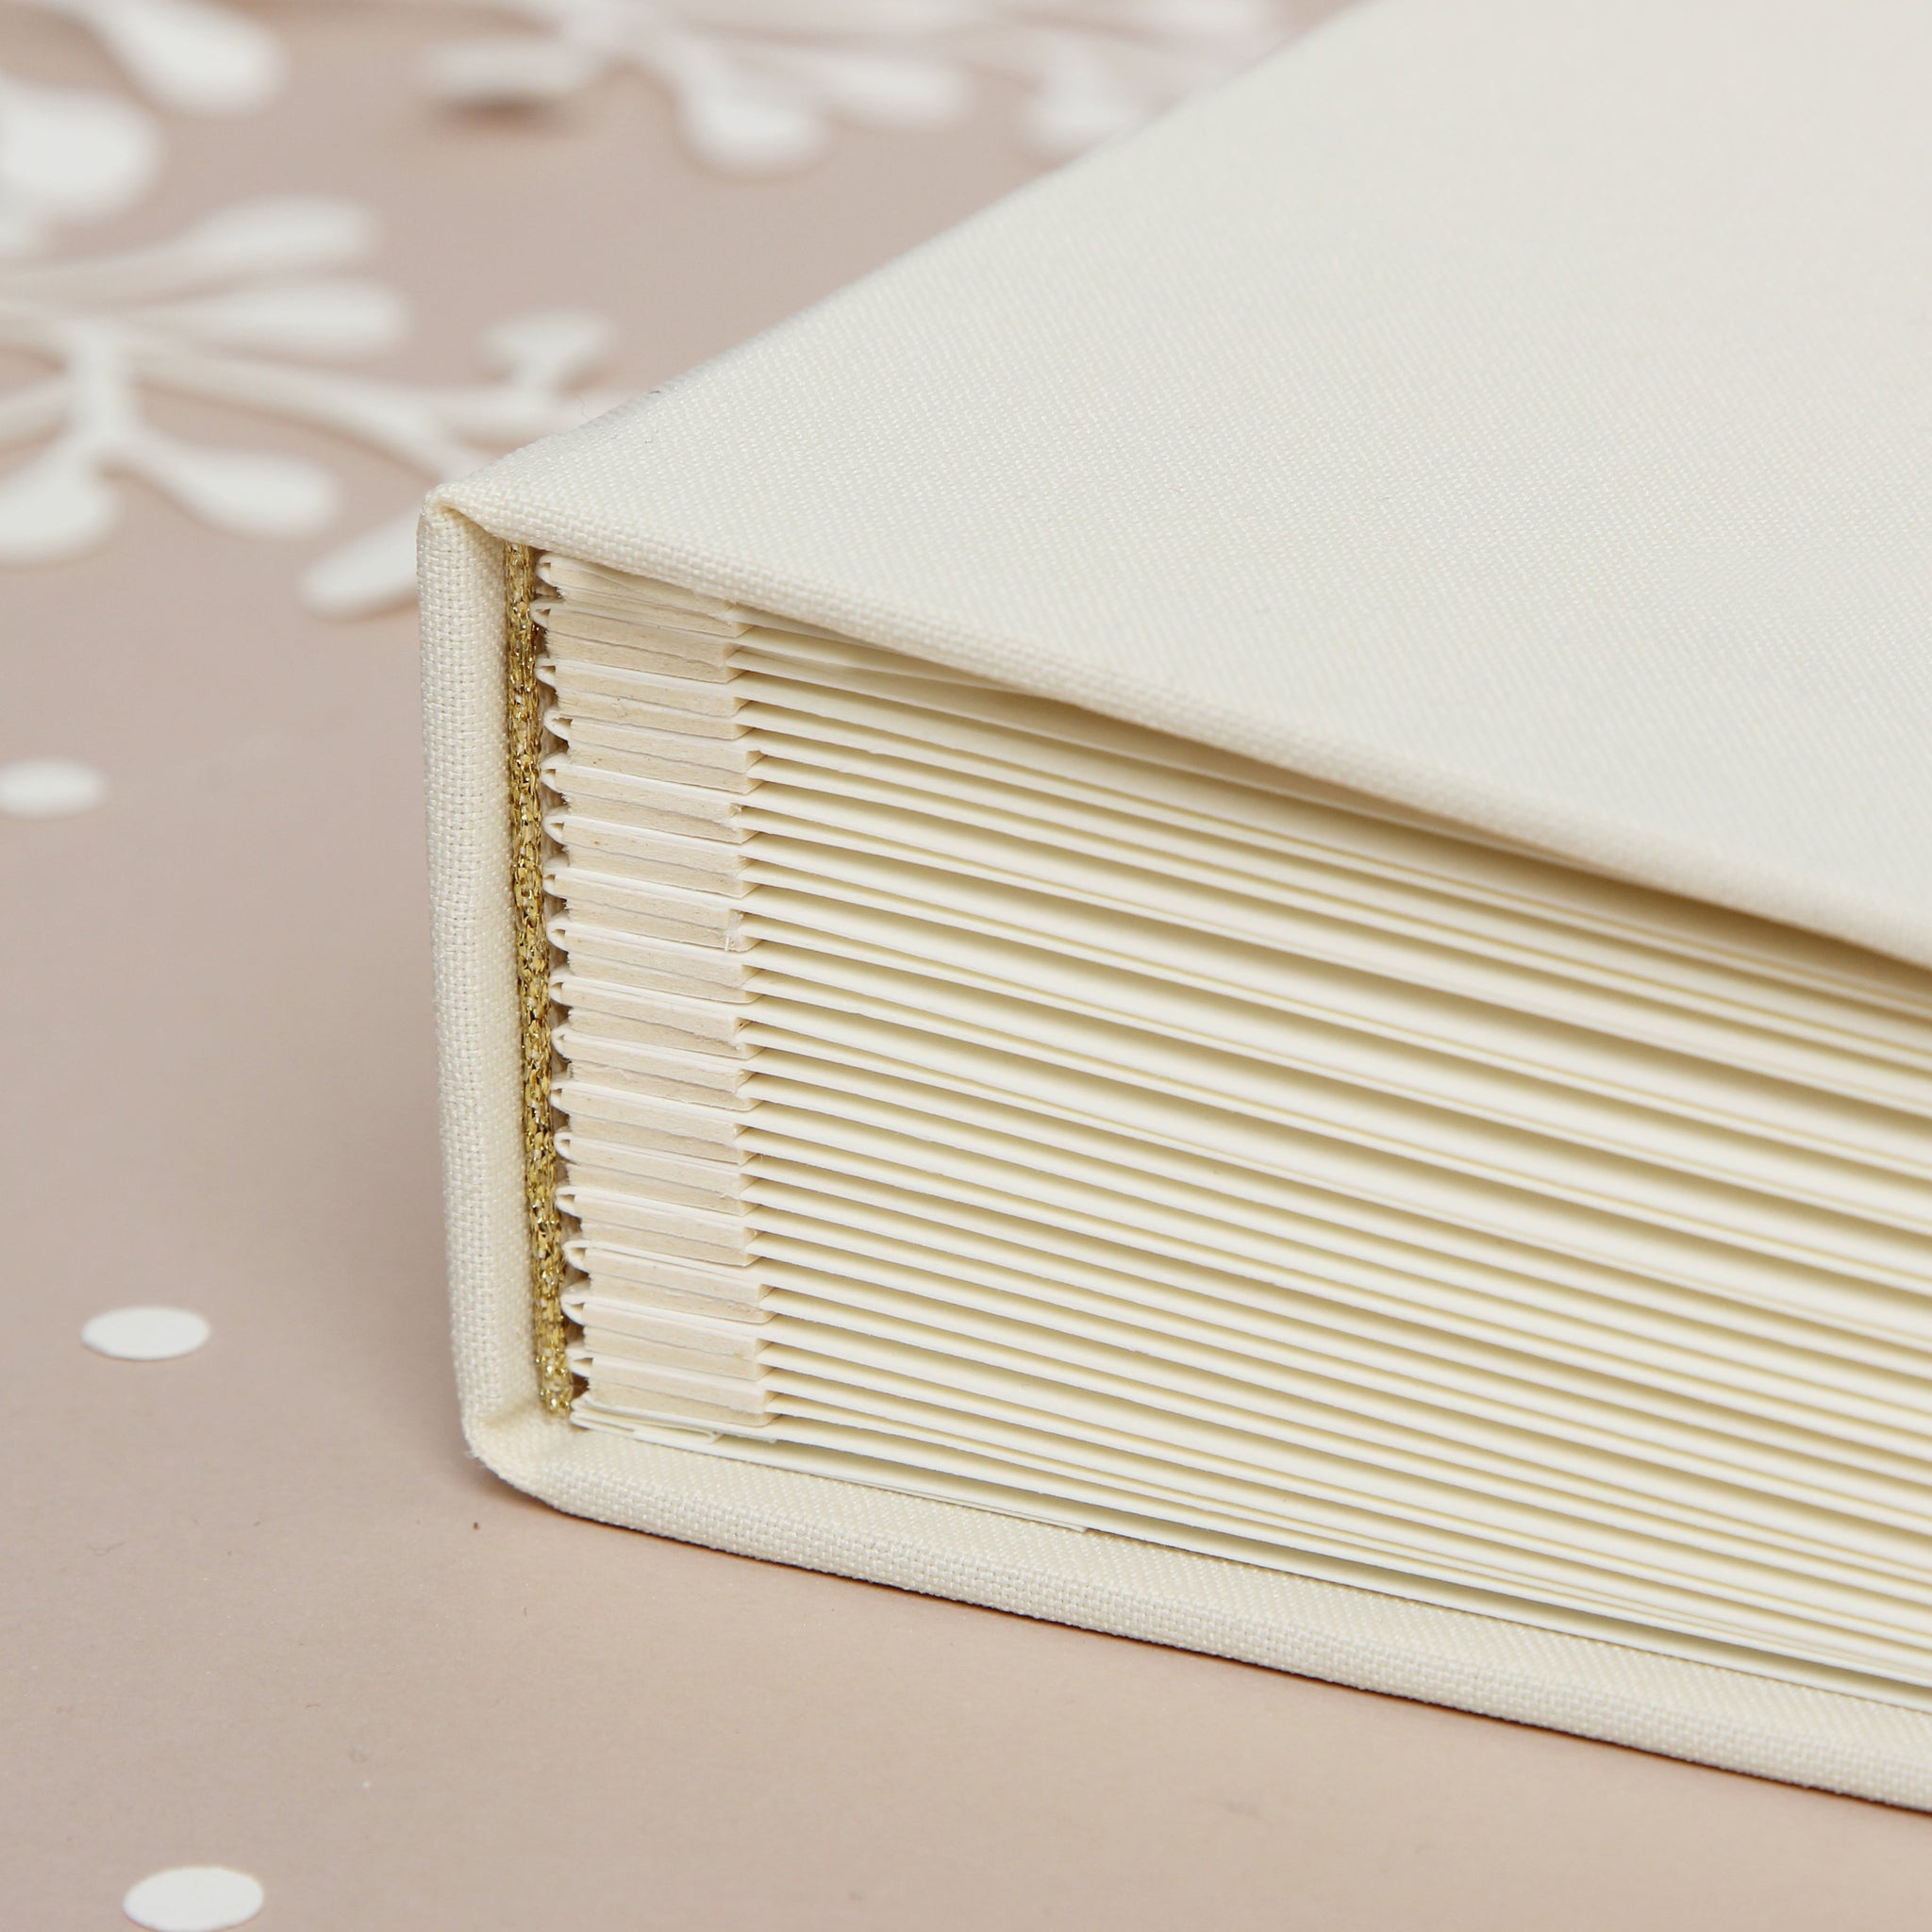 Instant Wedding Album Ivory Guest Book with Gold Glitter BOLD Lettering Instax Photo album - Liumy 